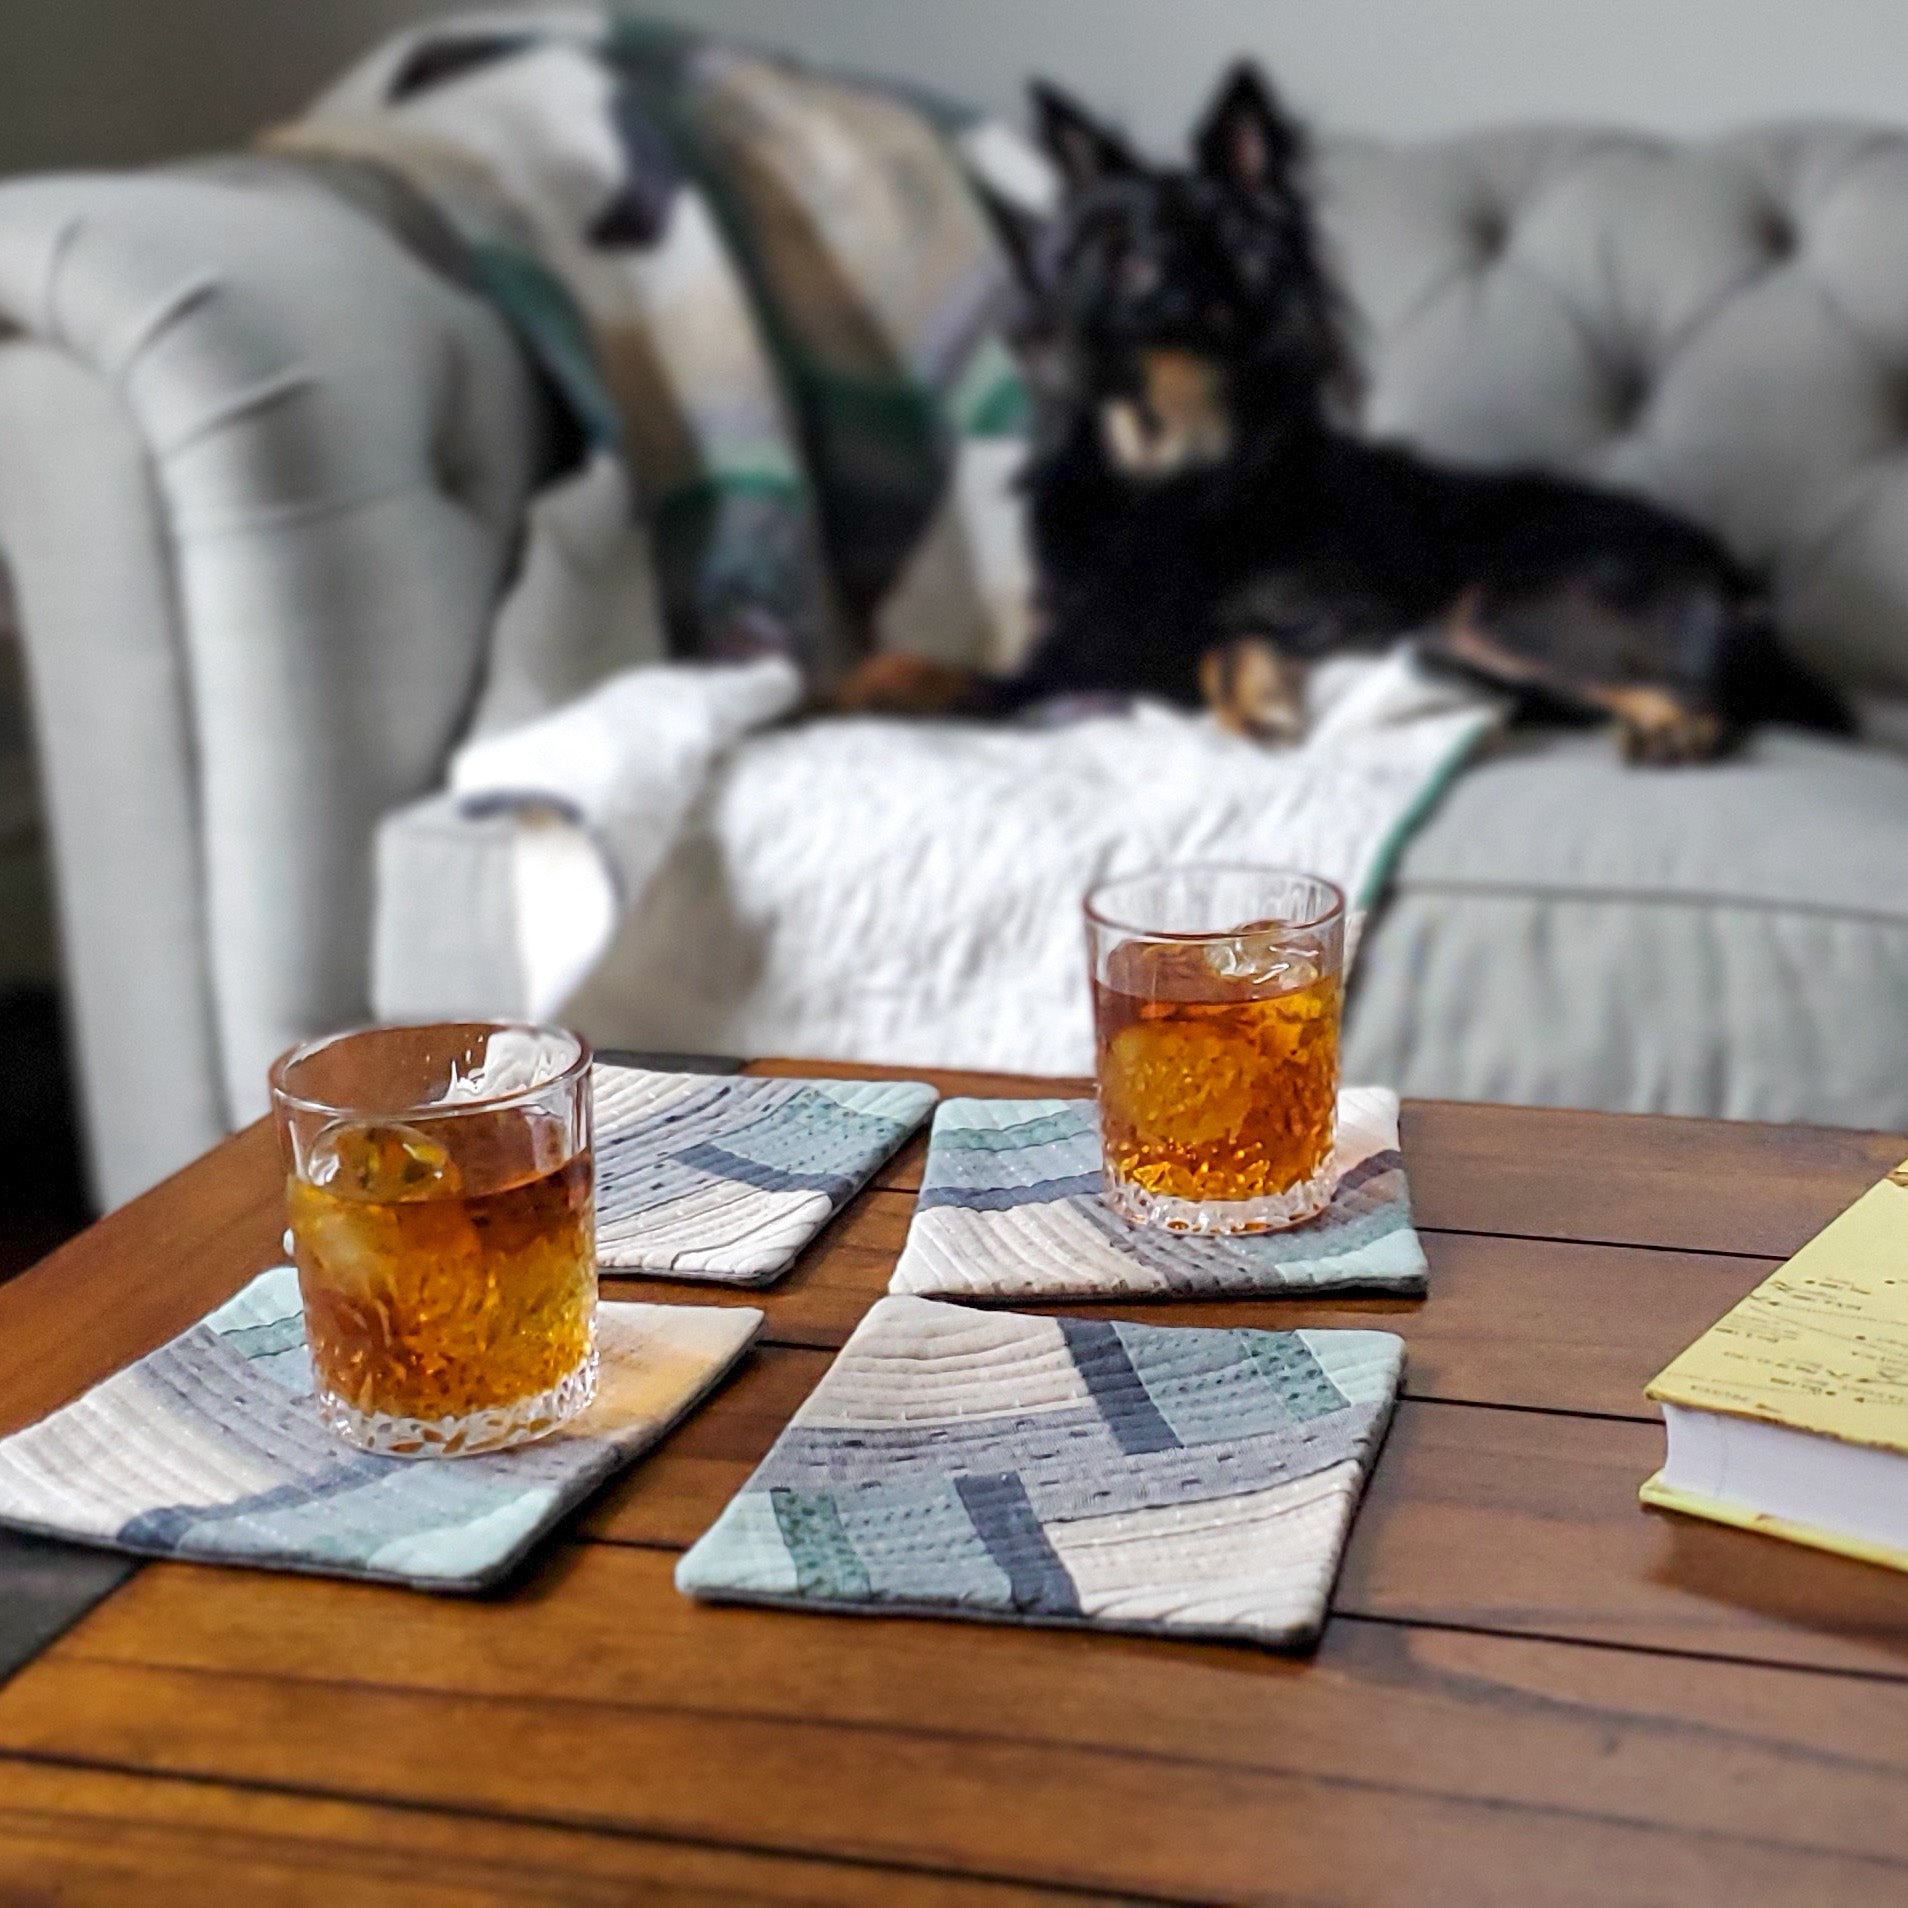 Mini Bracket Quilt Pattern - Julia Wachs Designs - The mini Bracken trivets on a coffee table with a dog in the background.